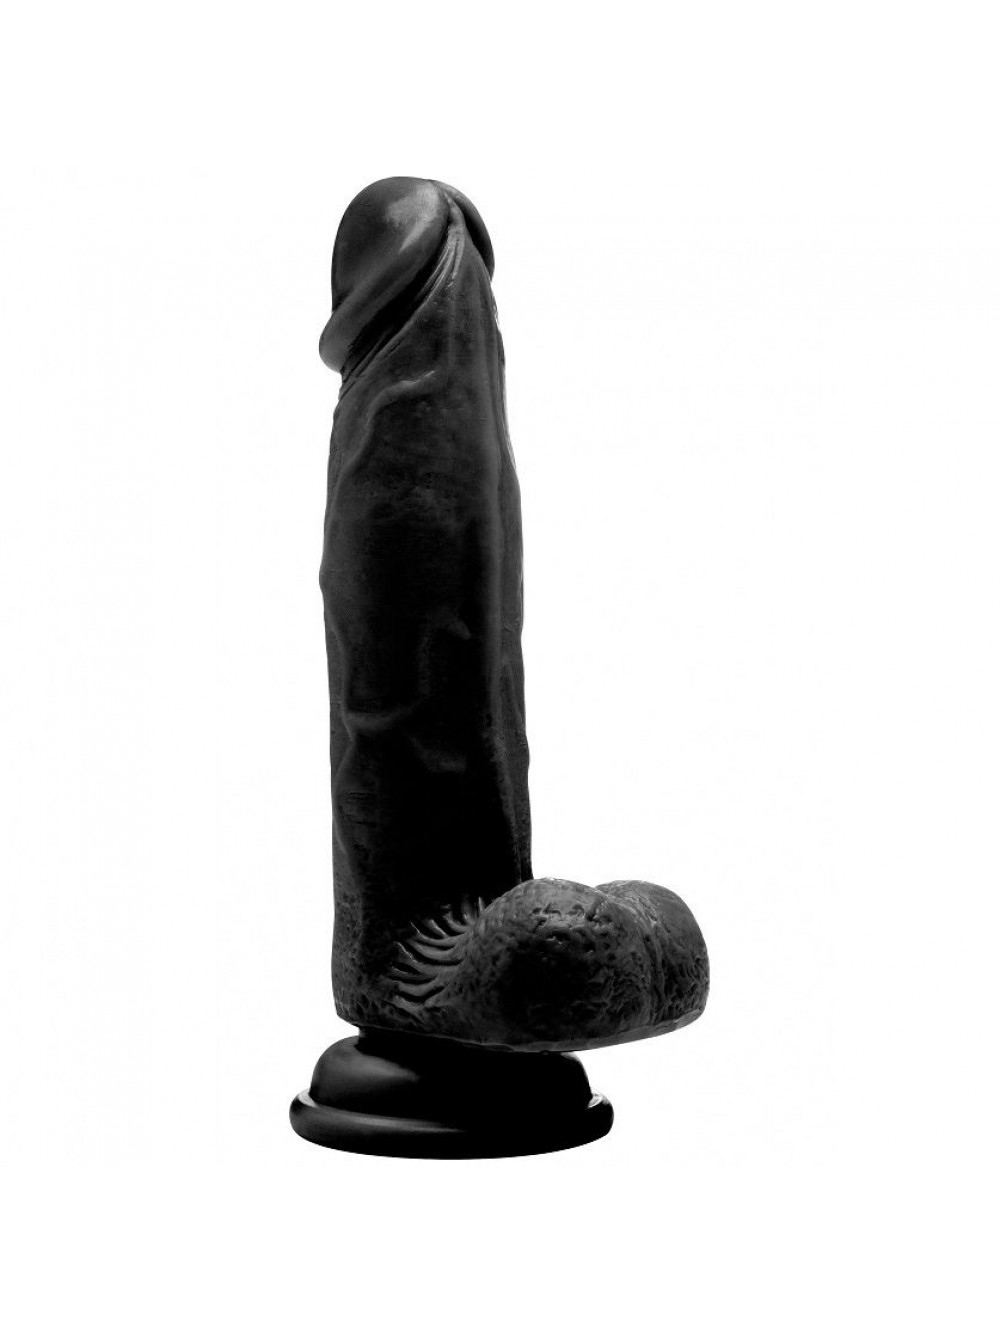 REAL ROCK 015 WITH SCROTUM 20 CM (15CM INS) BLACK 8714273071590